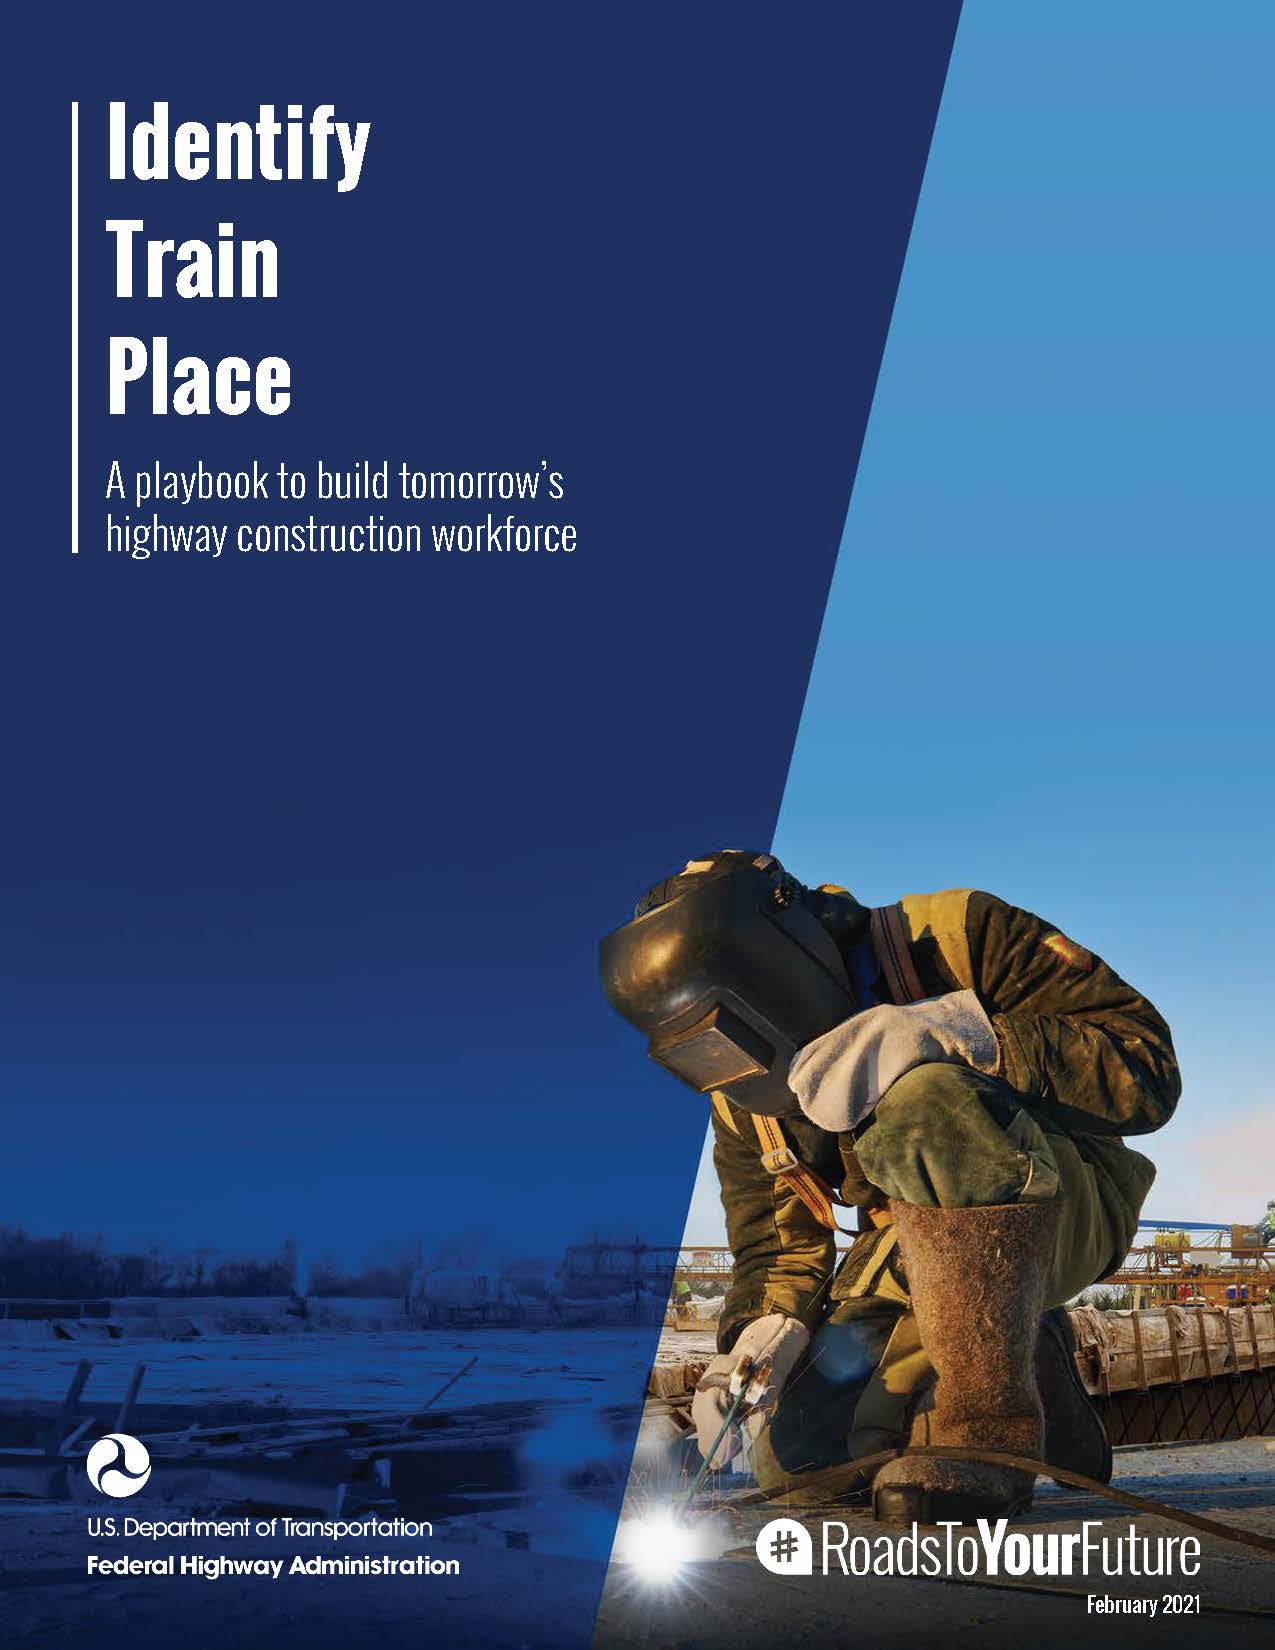 Cover of the “Identify, Train, Place” highway construction workforce development playbook with a welder and the title.